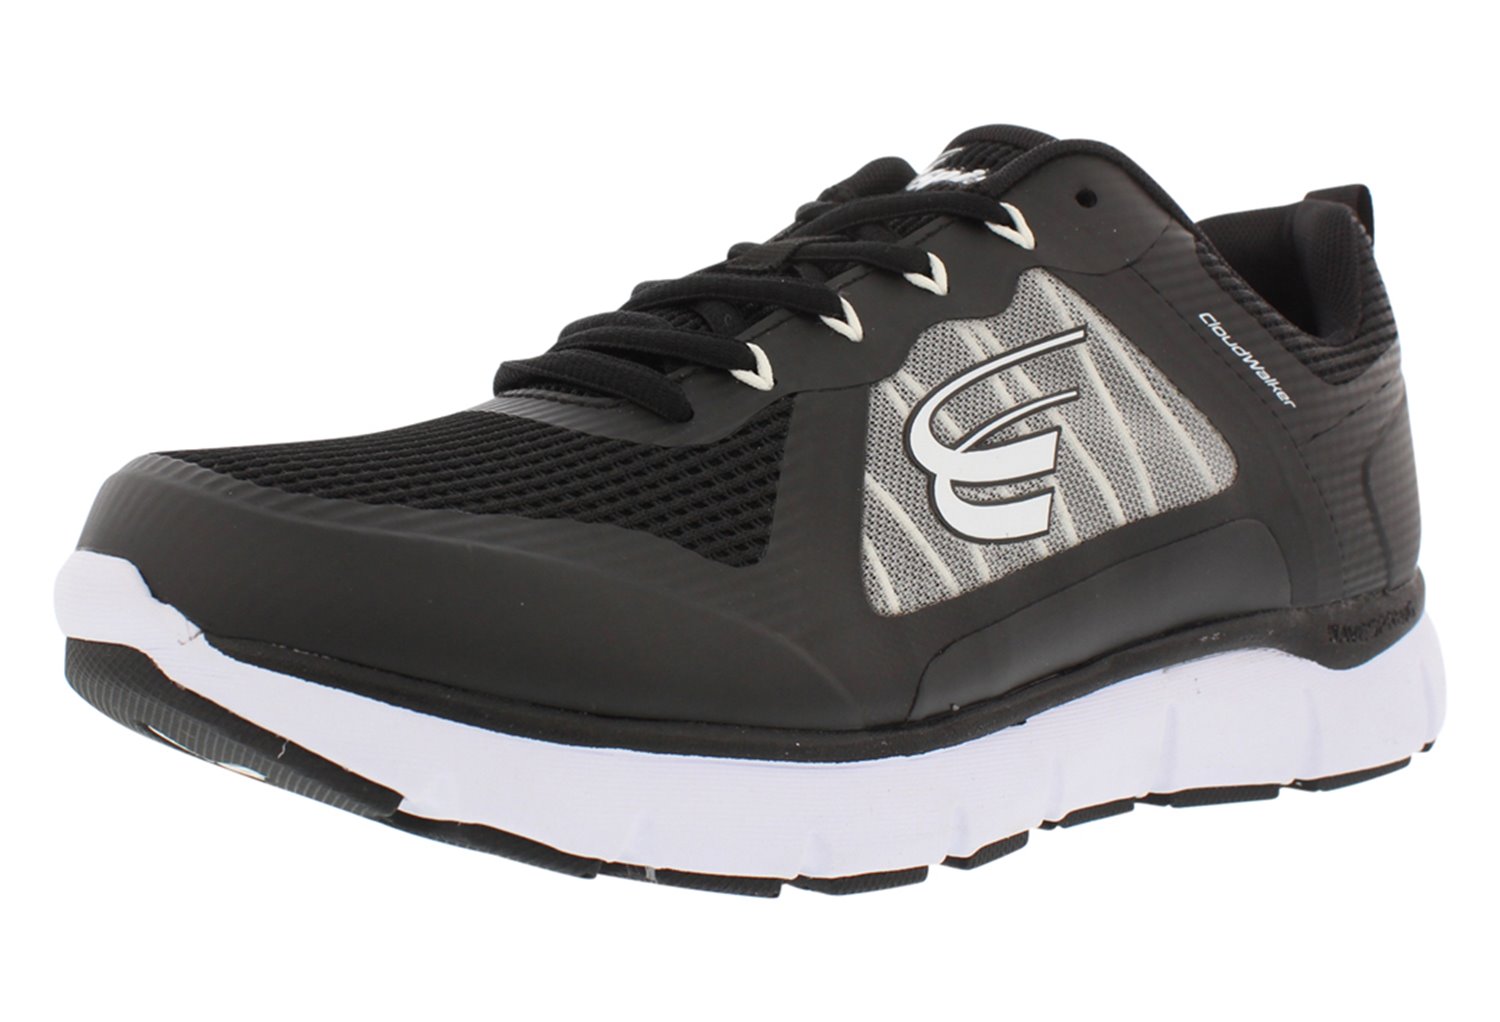 Athletic Walking Shoe with Springs 